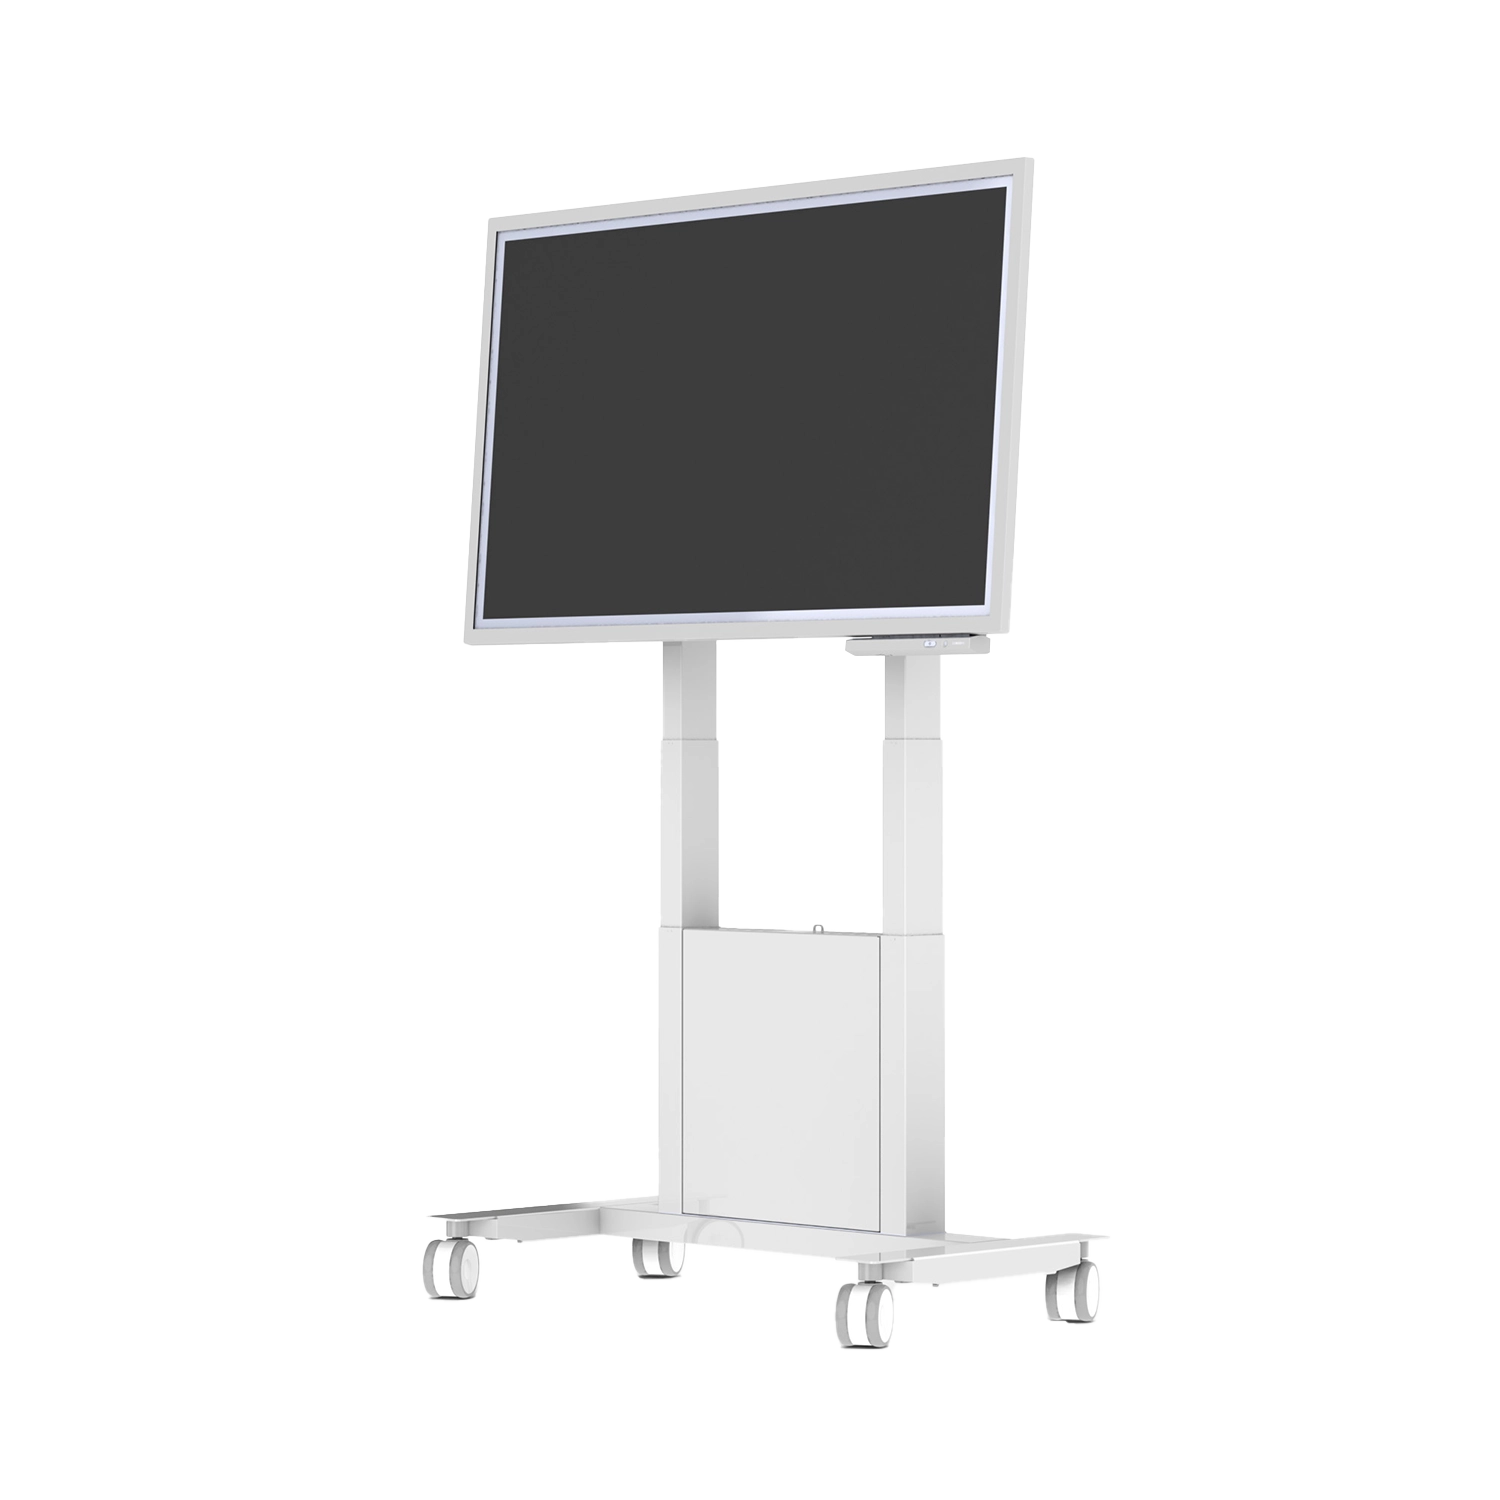 <span class="!font-bold">Func Mobile Motorized Flipster</span> will help you move around, rotate, and - perhaps best of all! - height-adjust your touch display. Designed to be a perfect match to Samsung Flip.